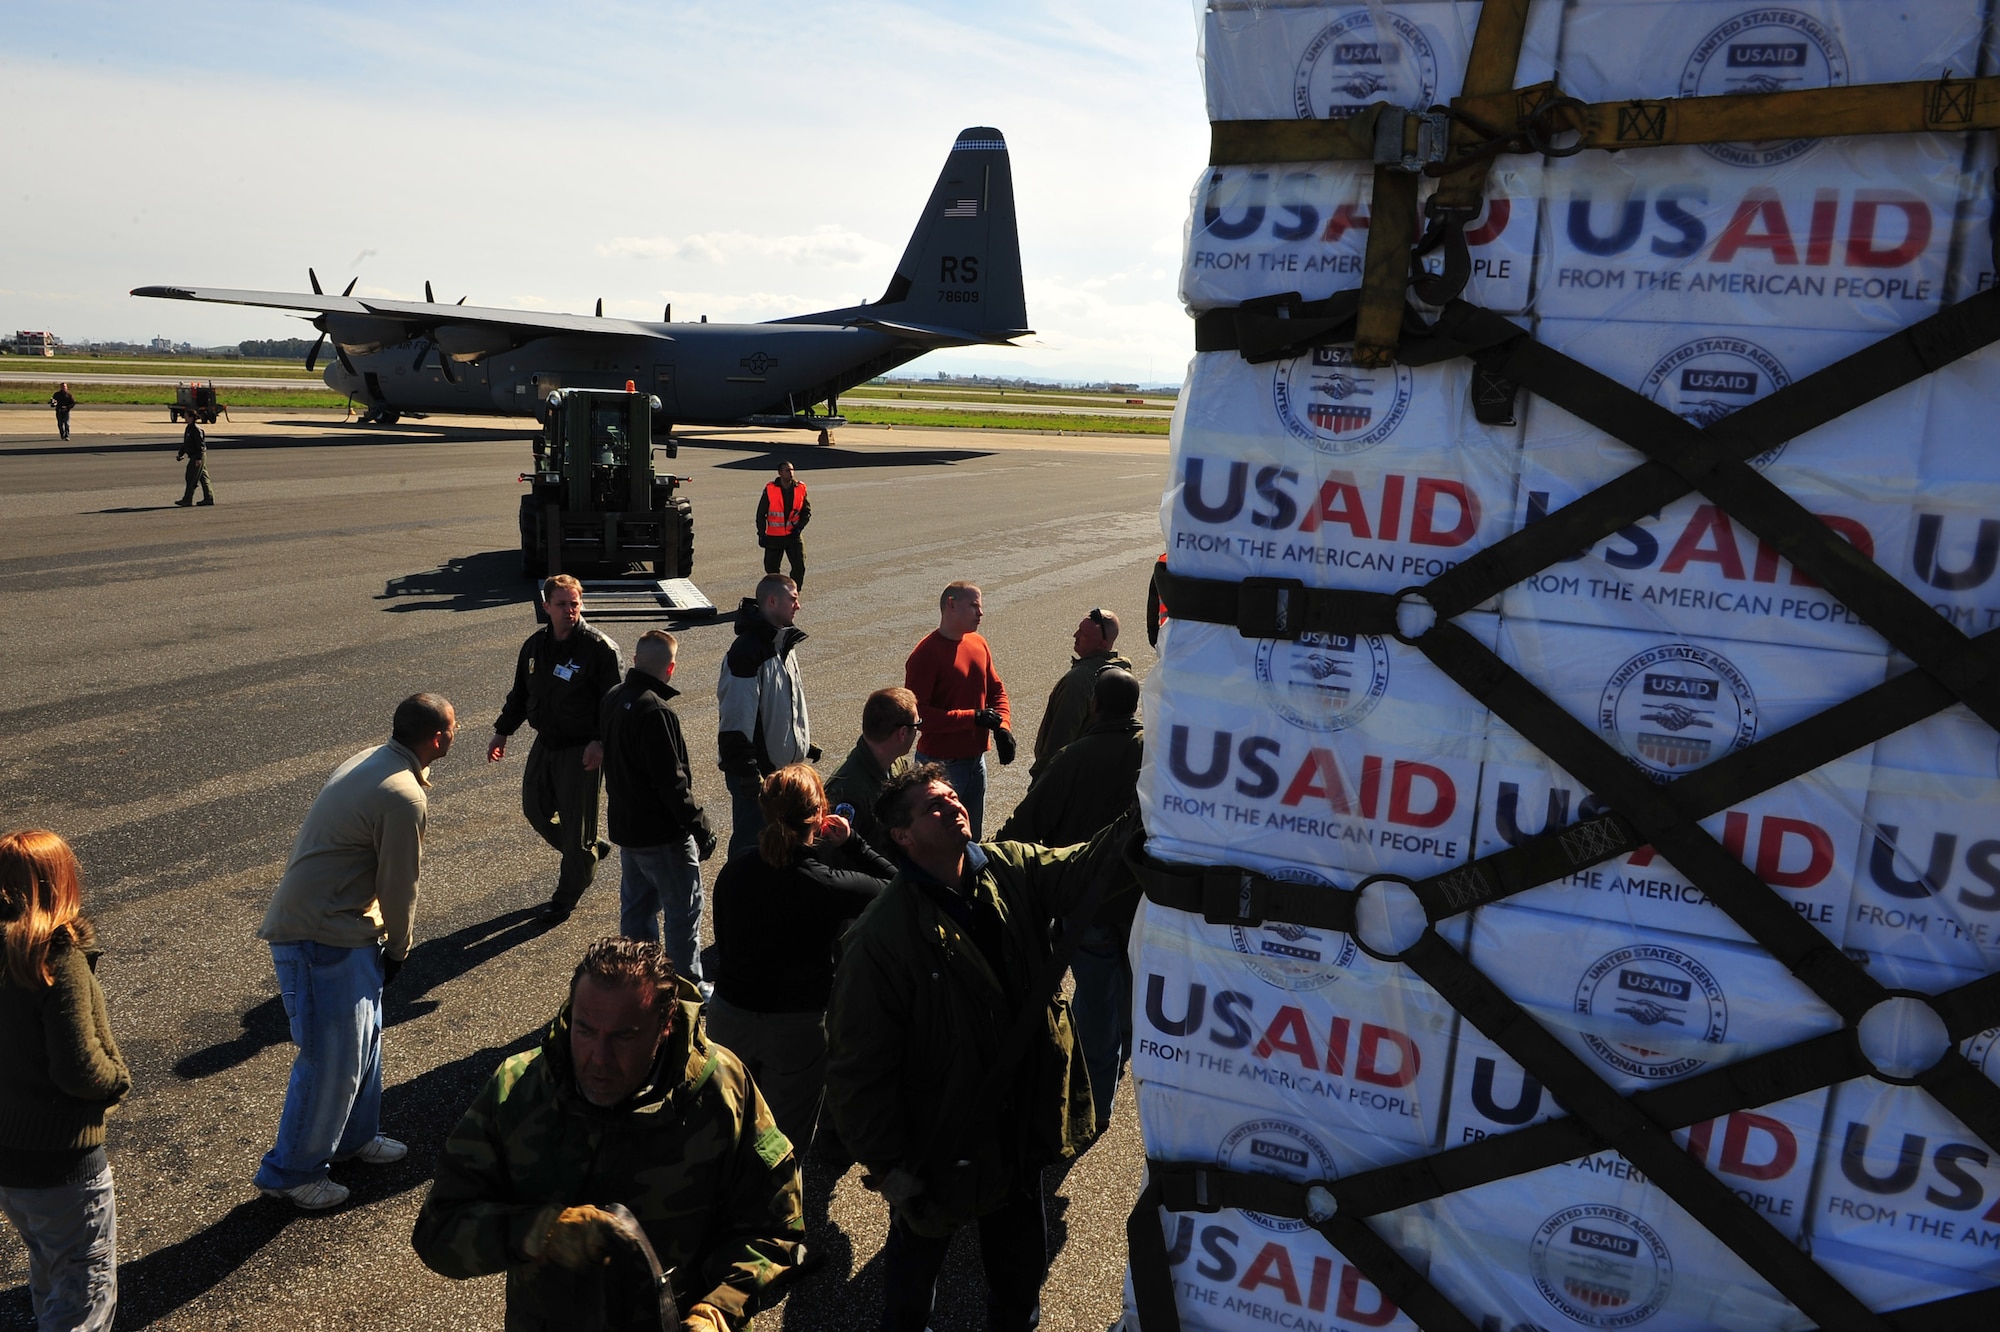 U.S. Airmen from the 435th Air Mobility Squadron, from Ramstein Air Base, picked up blankets, tarps and water containers from the U.S. Agency for International Development to load onto C-130 aircraft in Pisa, Italy. The Air Force will fly the supplies to Tunisia as part of the U.S. government's work with the international community to meet the humanitarian needs of the Lybian people and others in the country who fled across the borders during political unrest. (U.S. Army photo by Staff Sgt. Brendan Stephens)   
